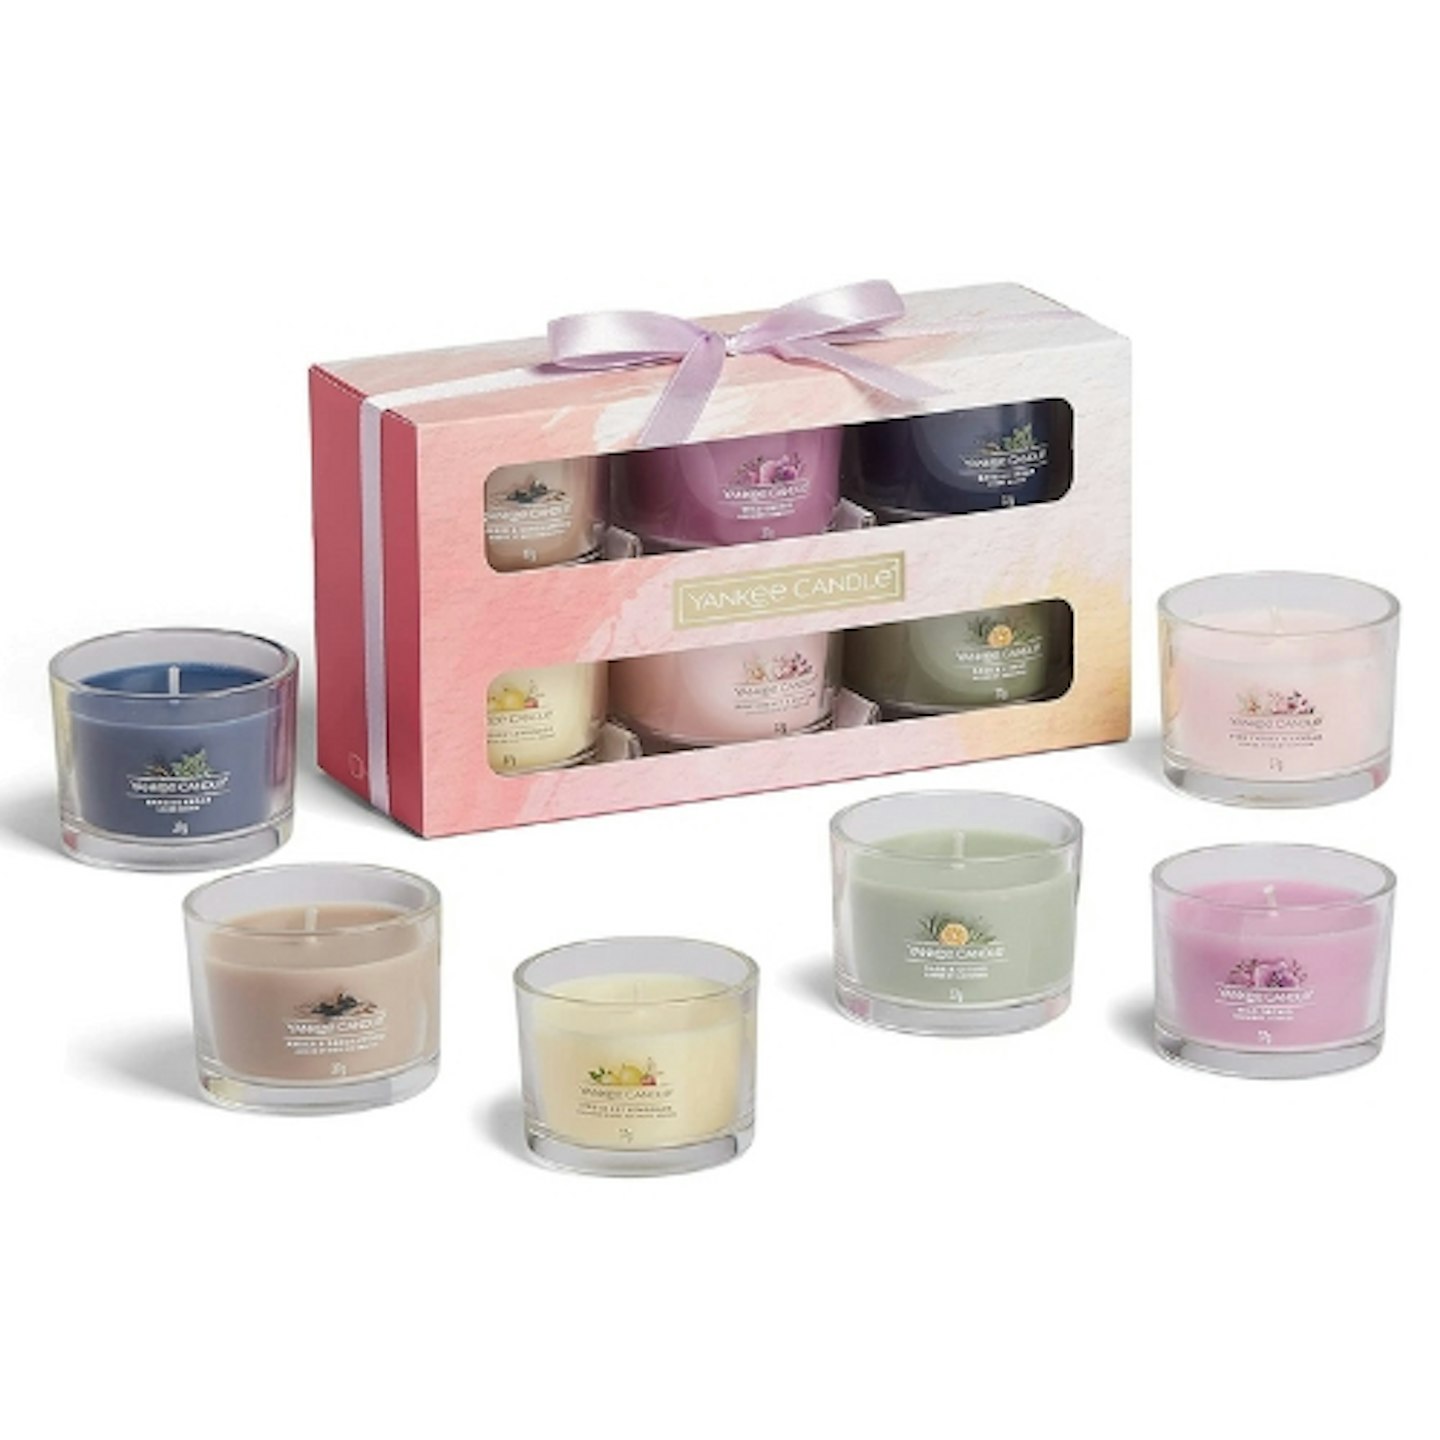 Yankee Candle Gift Set | 6 Scented Filled Votive Candles in Gift Box